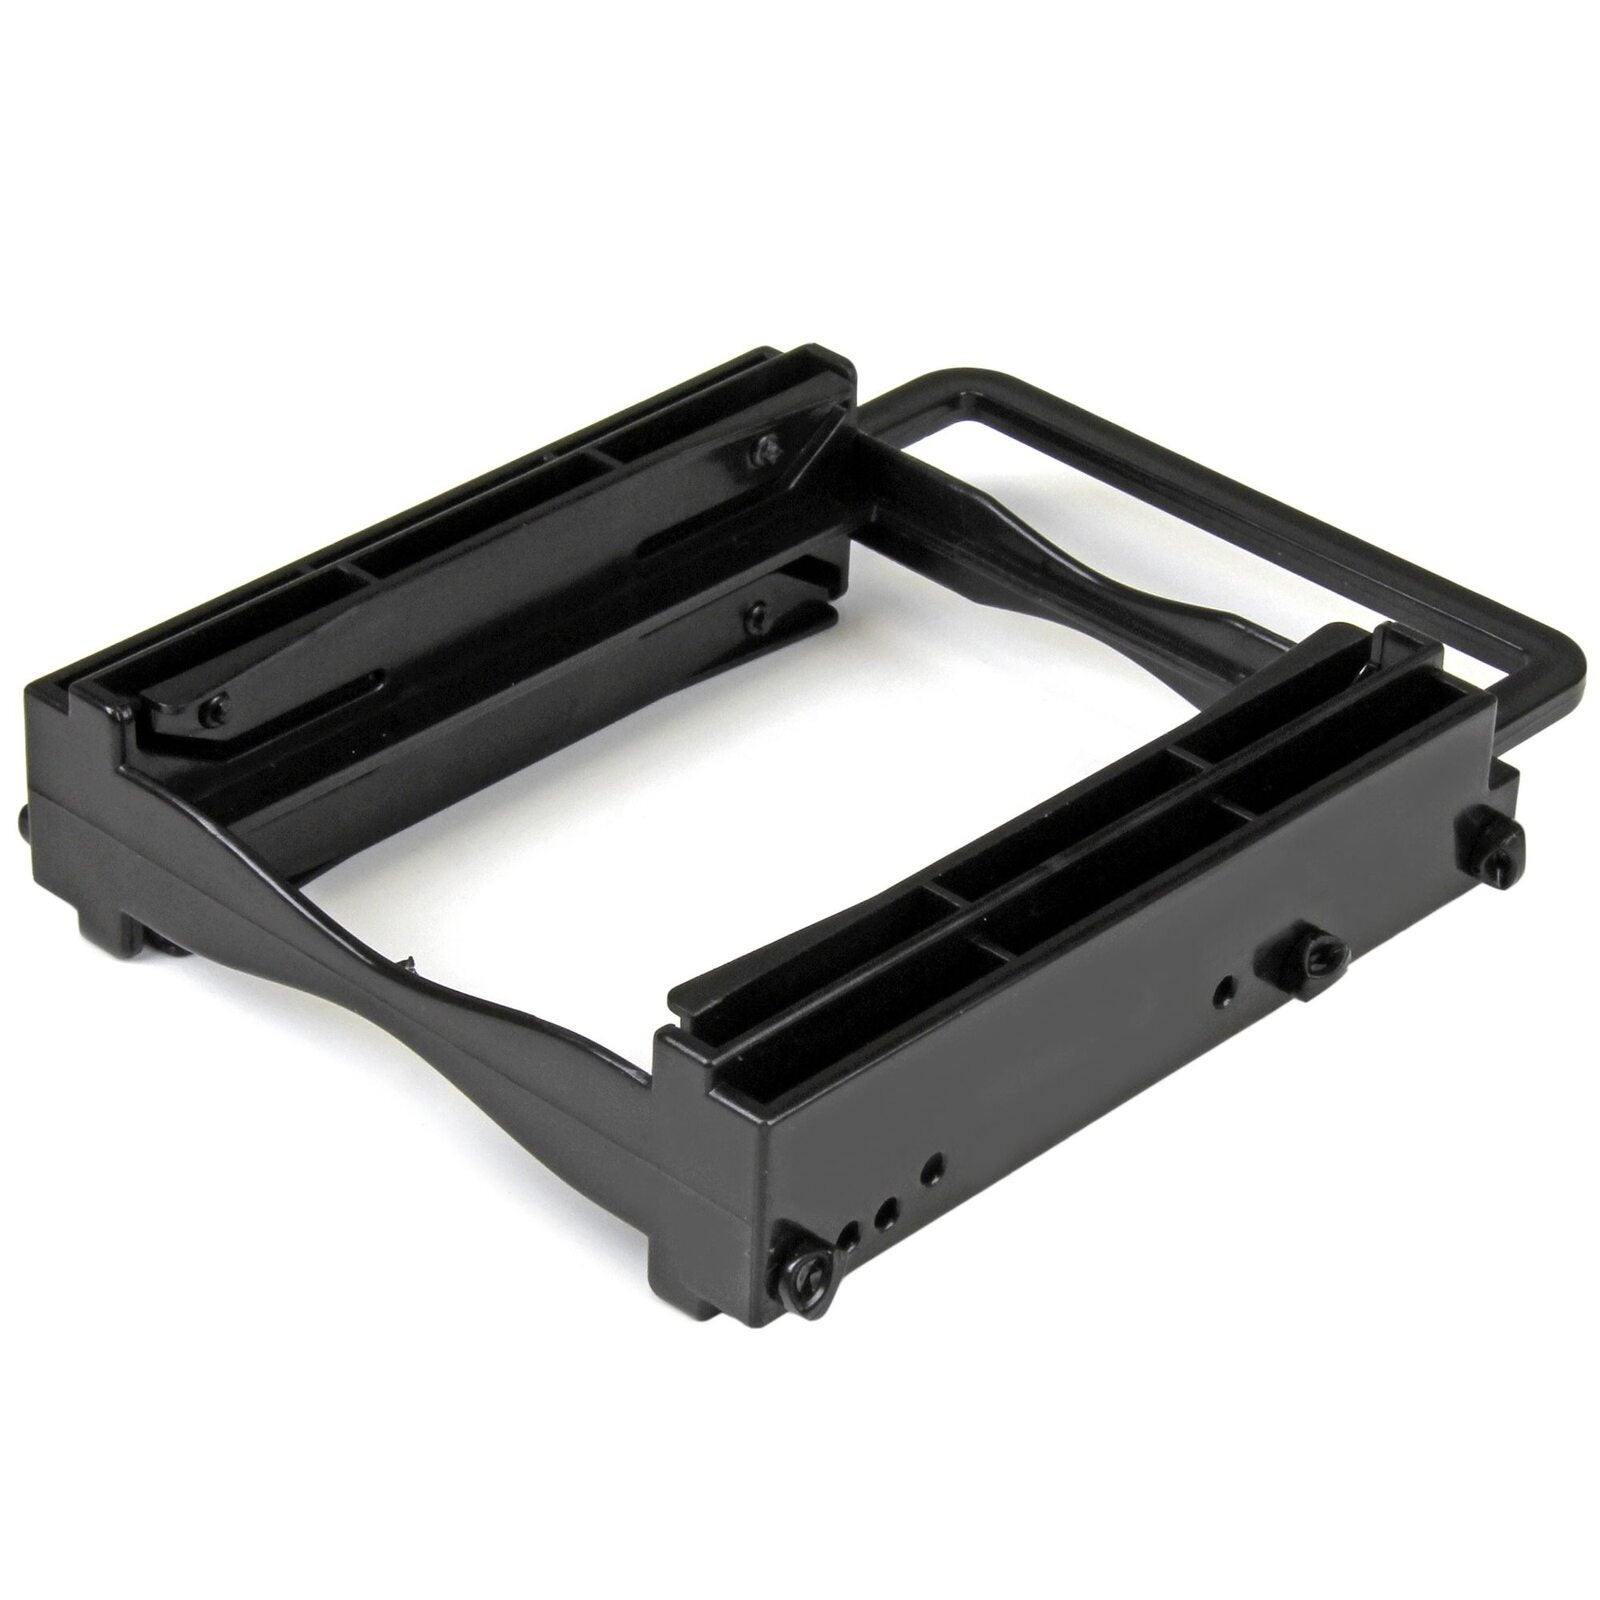 Star Tech Dual 2.5" SSD/HDD to 3.5" Bay Mounting Bracket for H5mm/12.5mm Drive